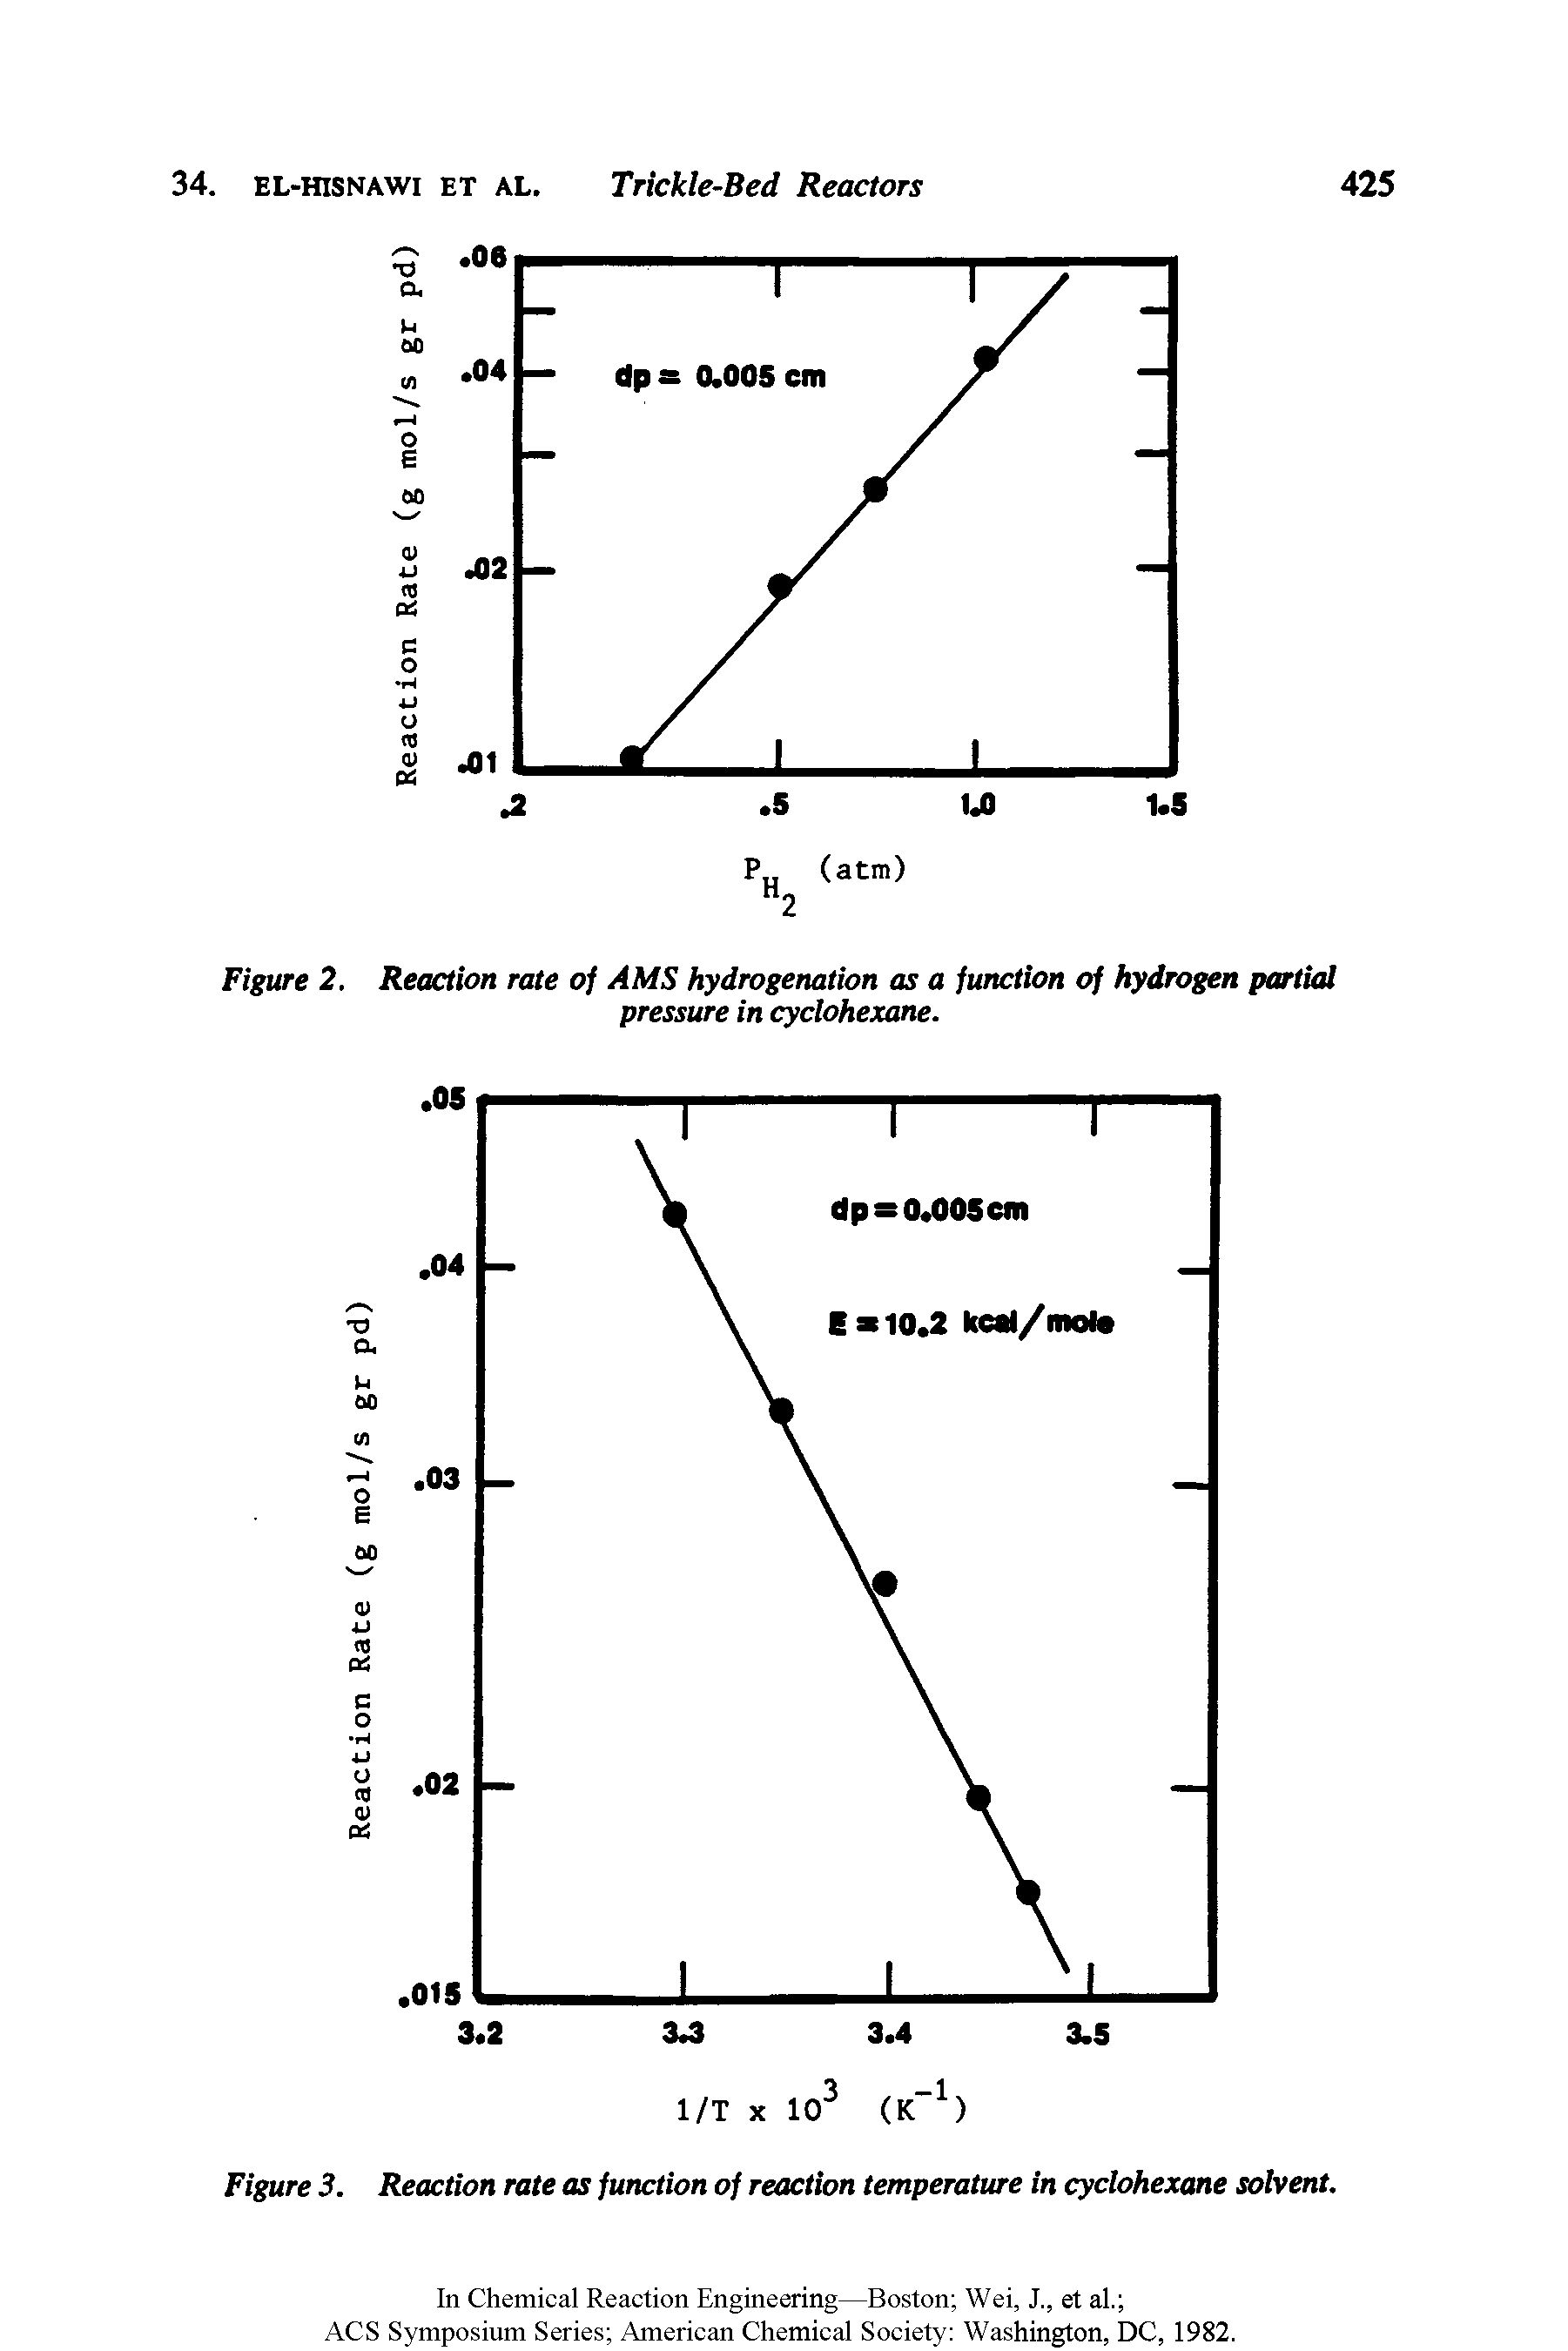 Figure 3. Reaction rate as function of reaction temperature in cyclohexane solvent.